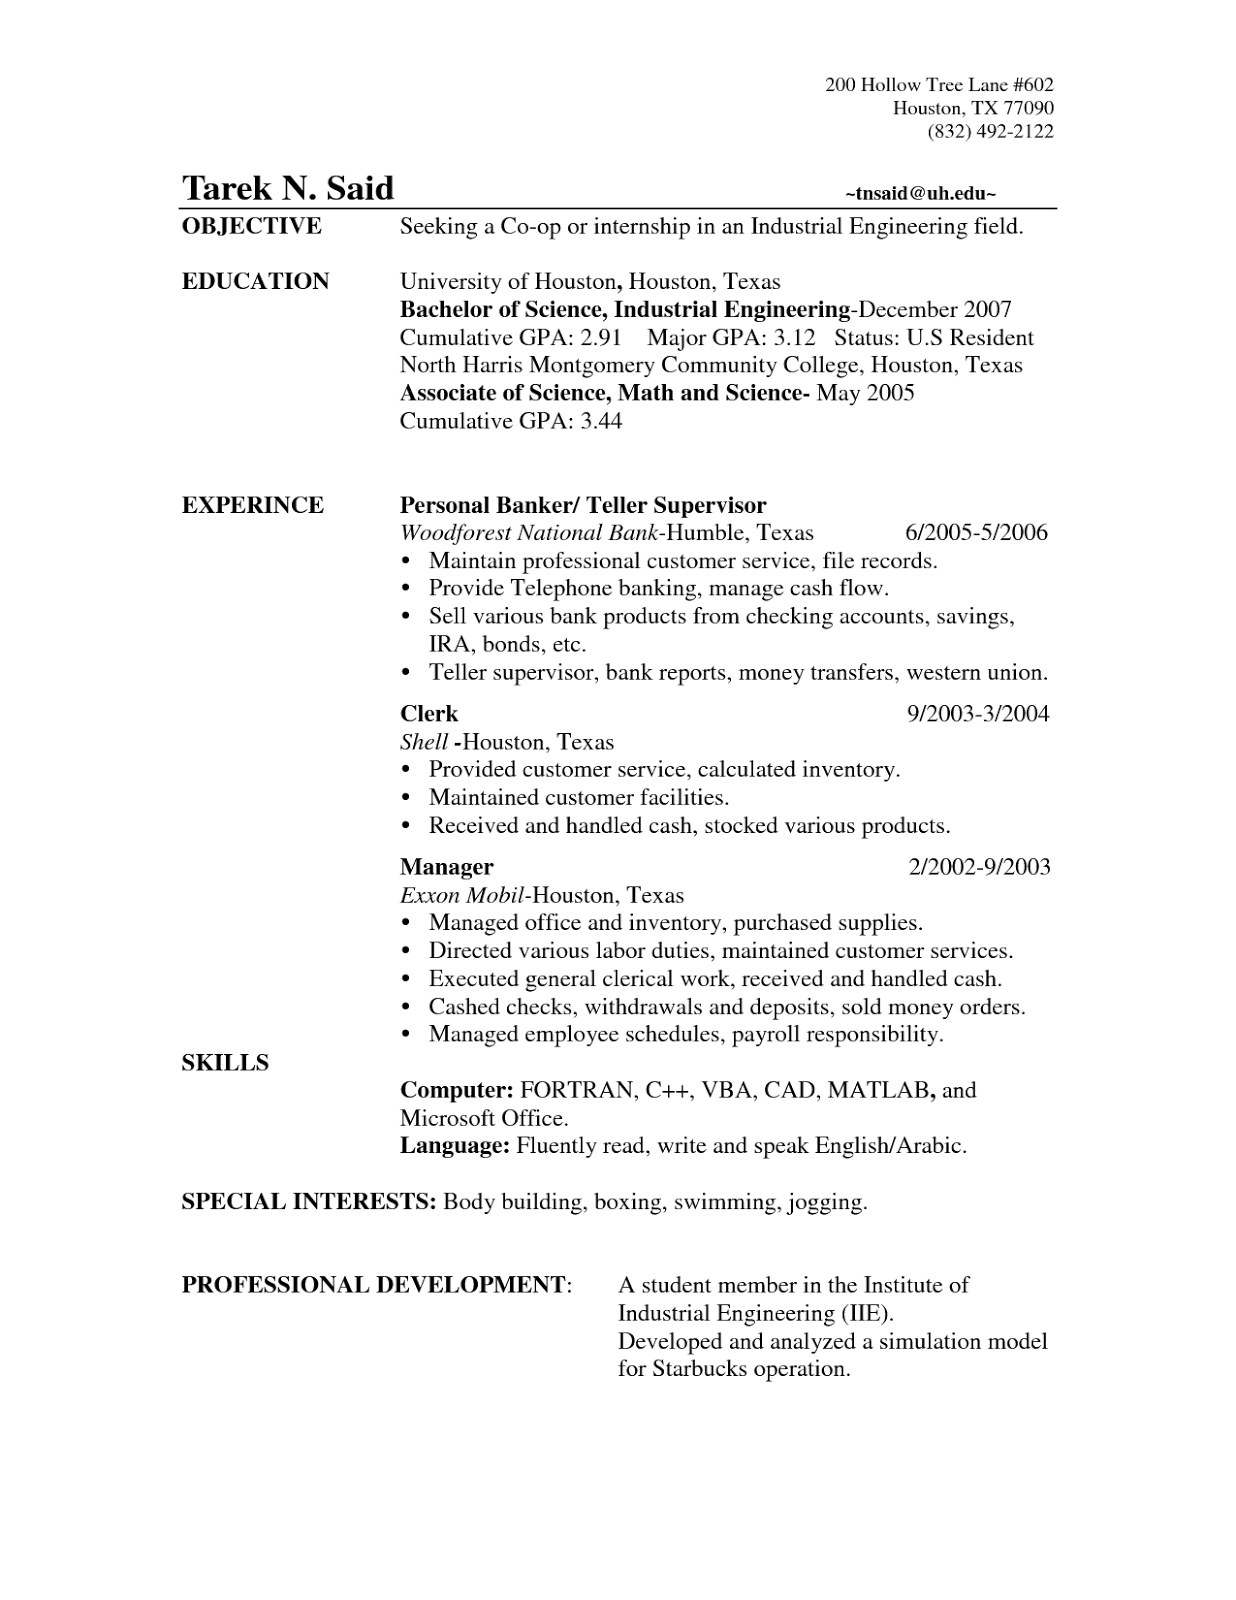 applying for a bank teller position resume, bank teller resume templates no experience, best resume for bank teller, how to become a bank teller, bank teller cover letter, resume for bank teller job with no experience, teller skills resume, bank teller resume sample, free-sampleresumes.blogspot.com